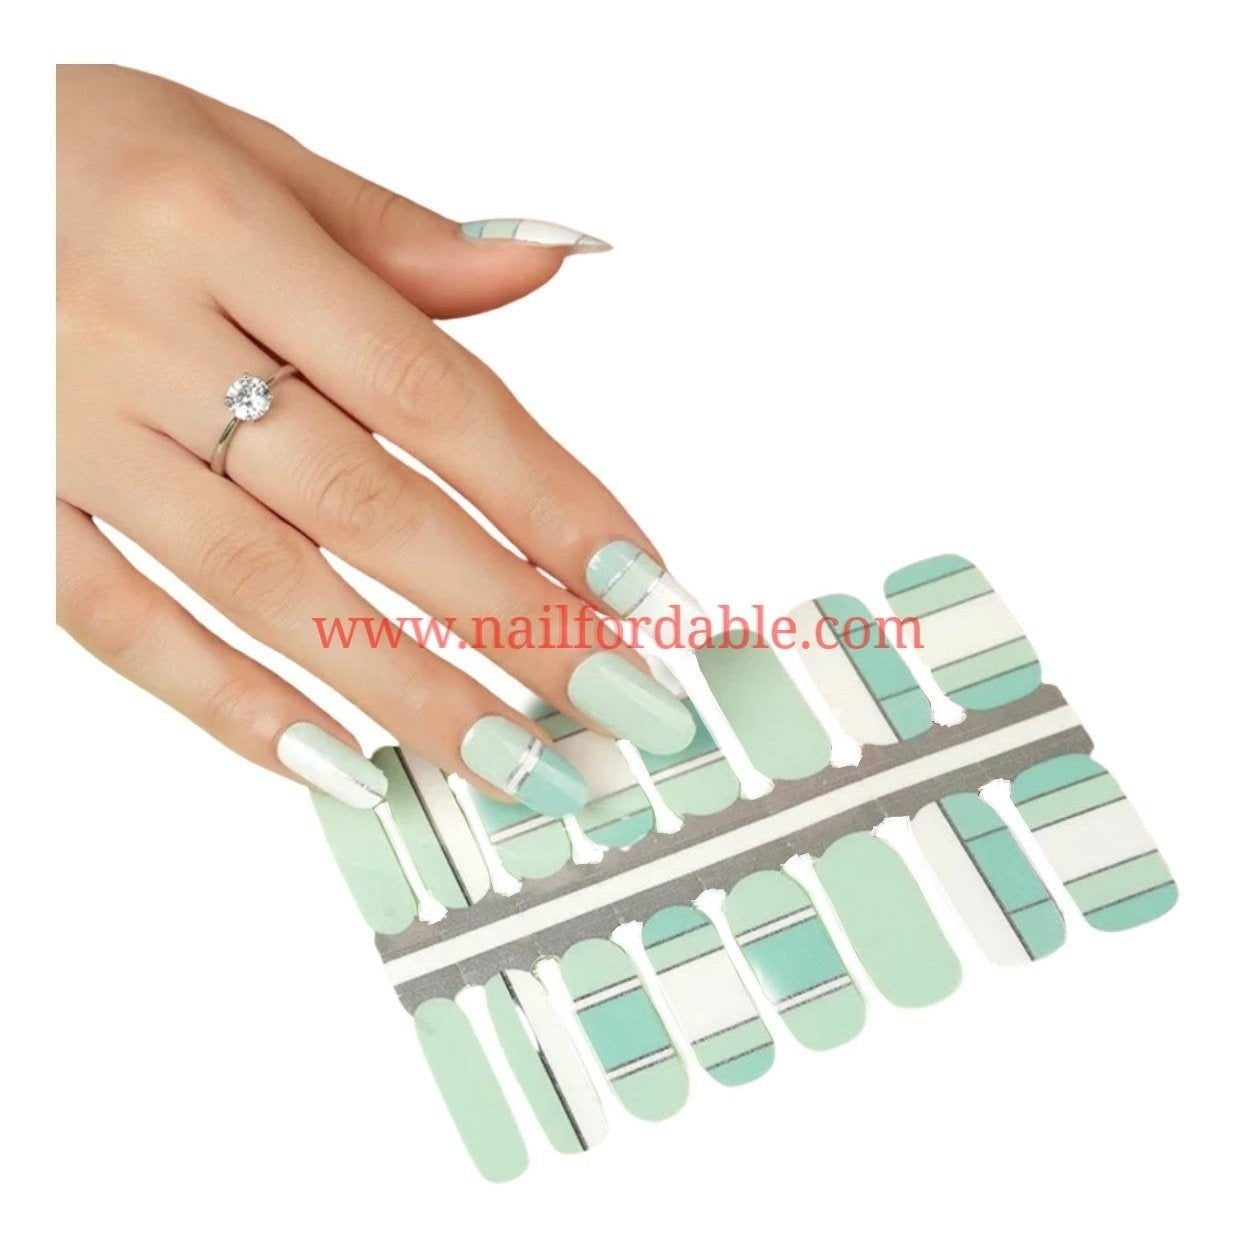 Vertical or horizontal? Nail Wraps | Semi Cured Gel Wraps | Gel Nail Wraps |Nail Polish | Nail Stickers